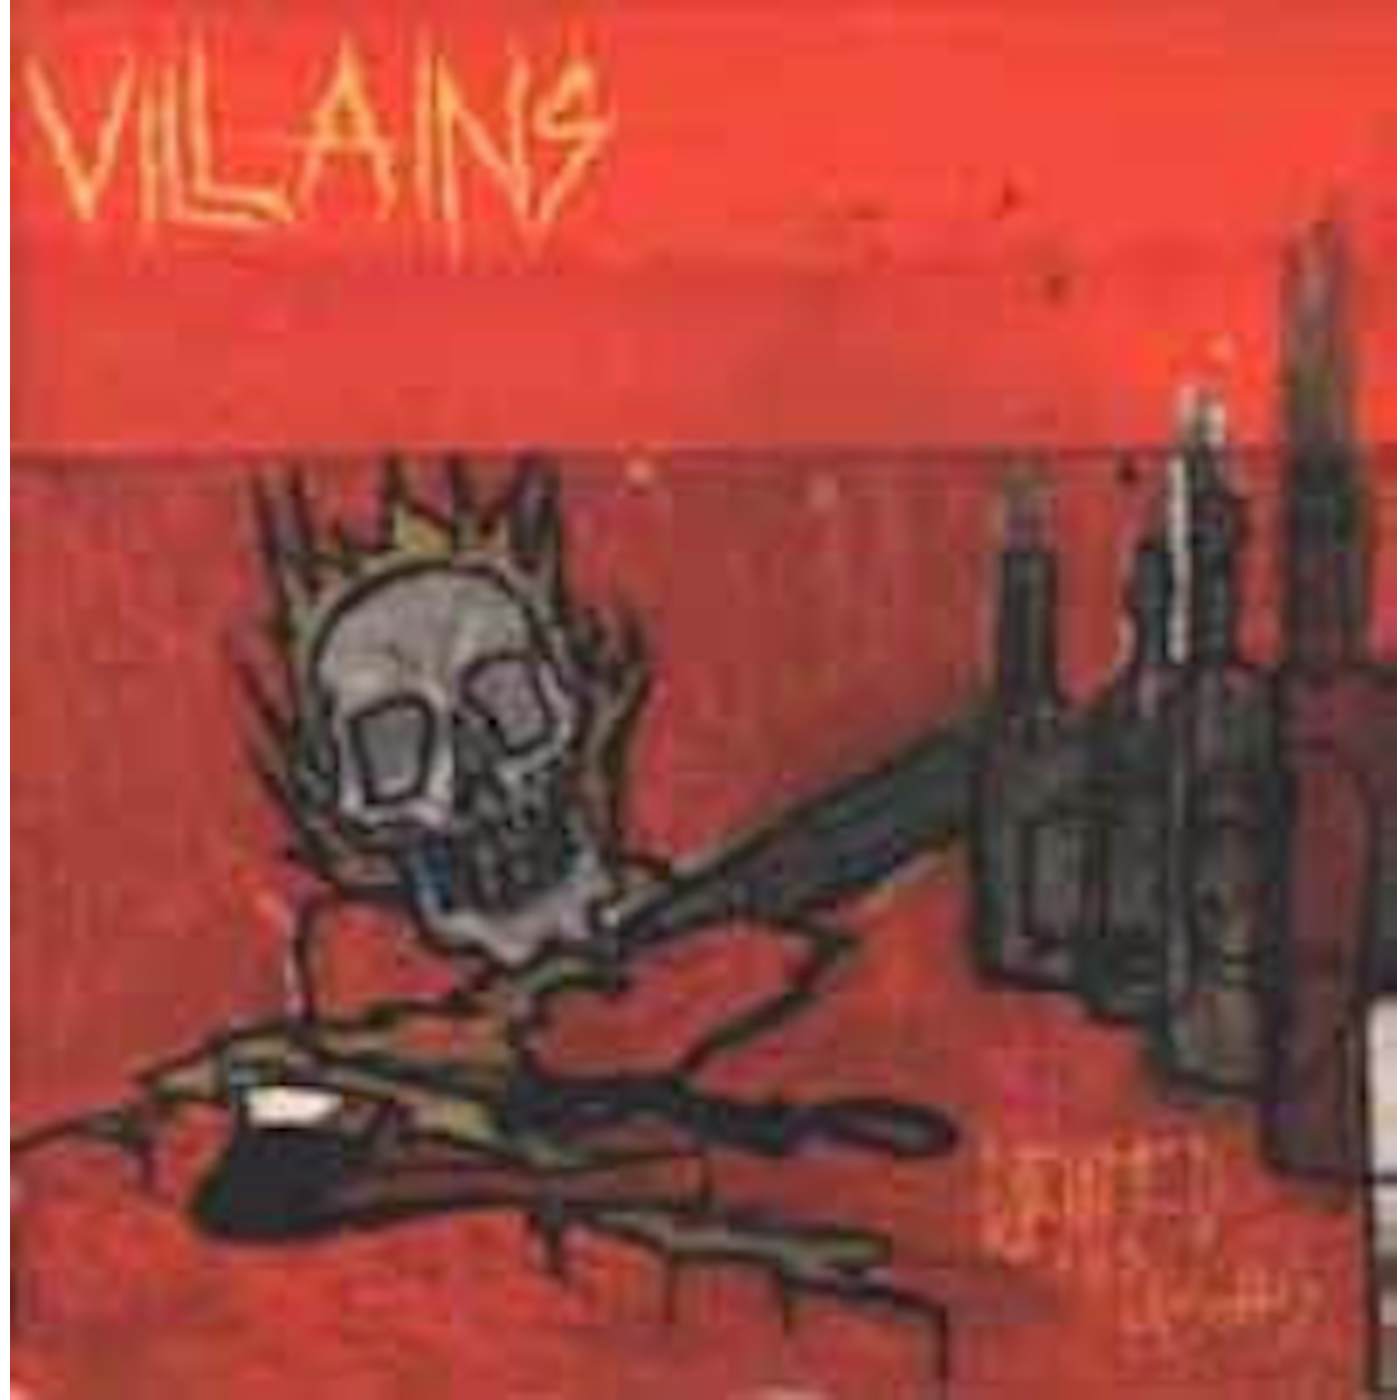 Villains LP - Drenched In The Poisons (Vinyl)